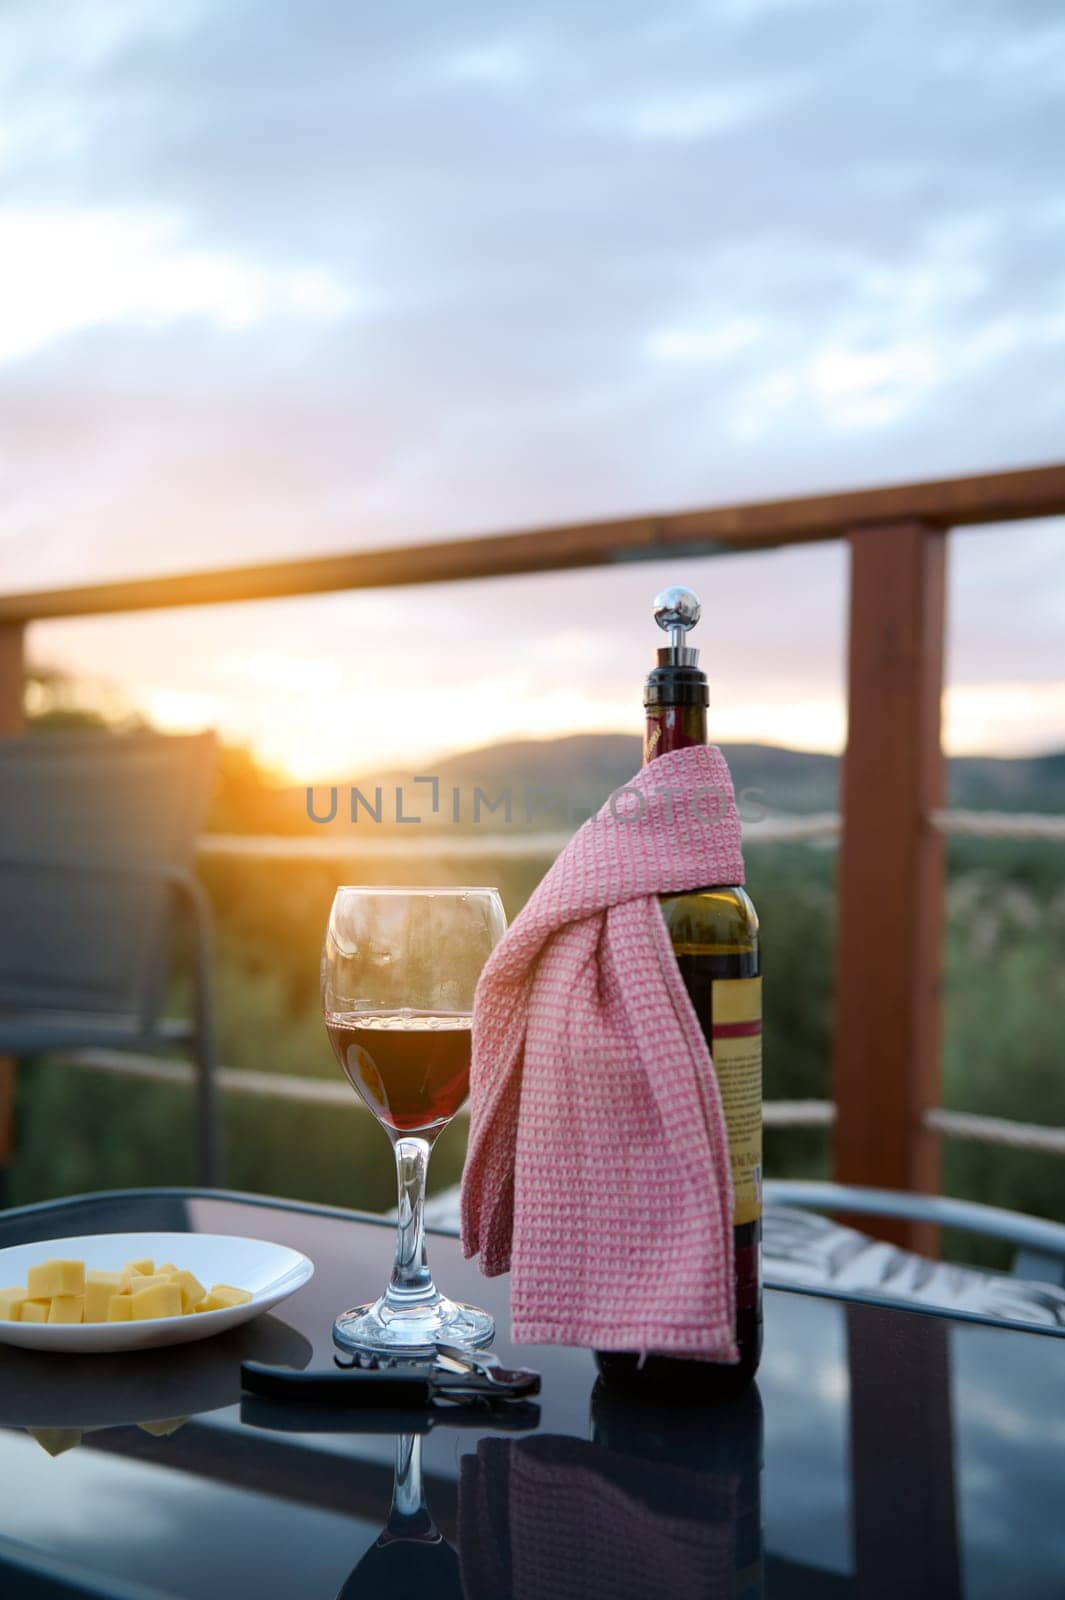 Glass of wine with delicious red wine near a plate with sliced cheese on a summer terrace against sunset background. Romantic dinner. Aperitif. Food background